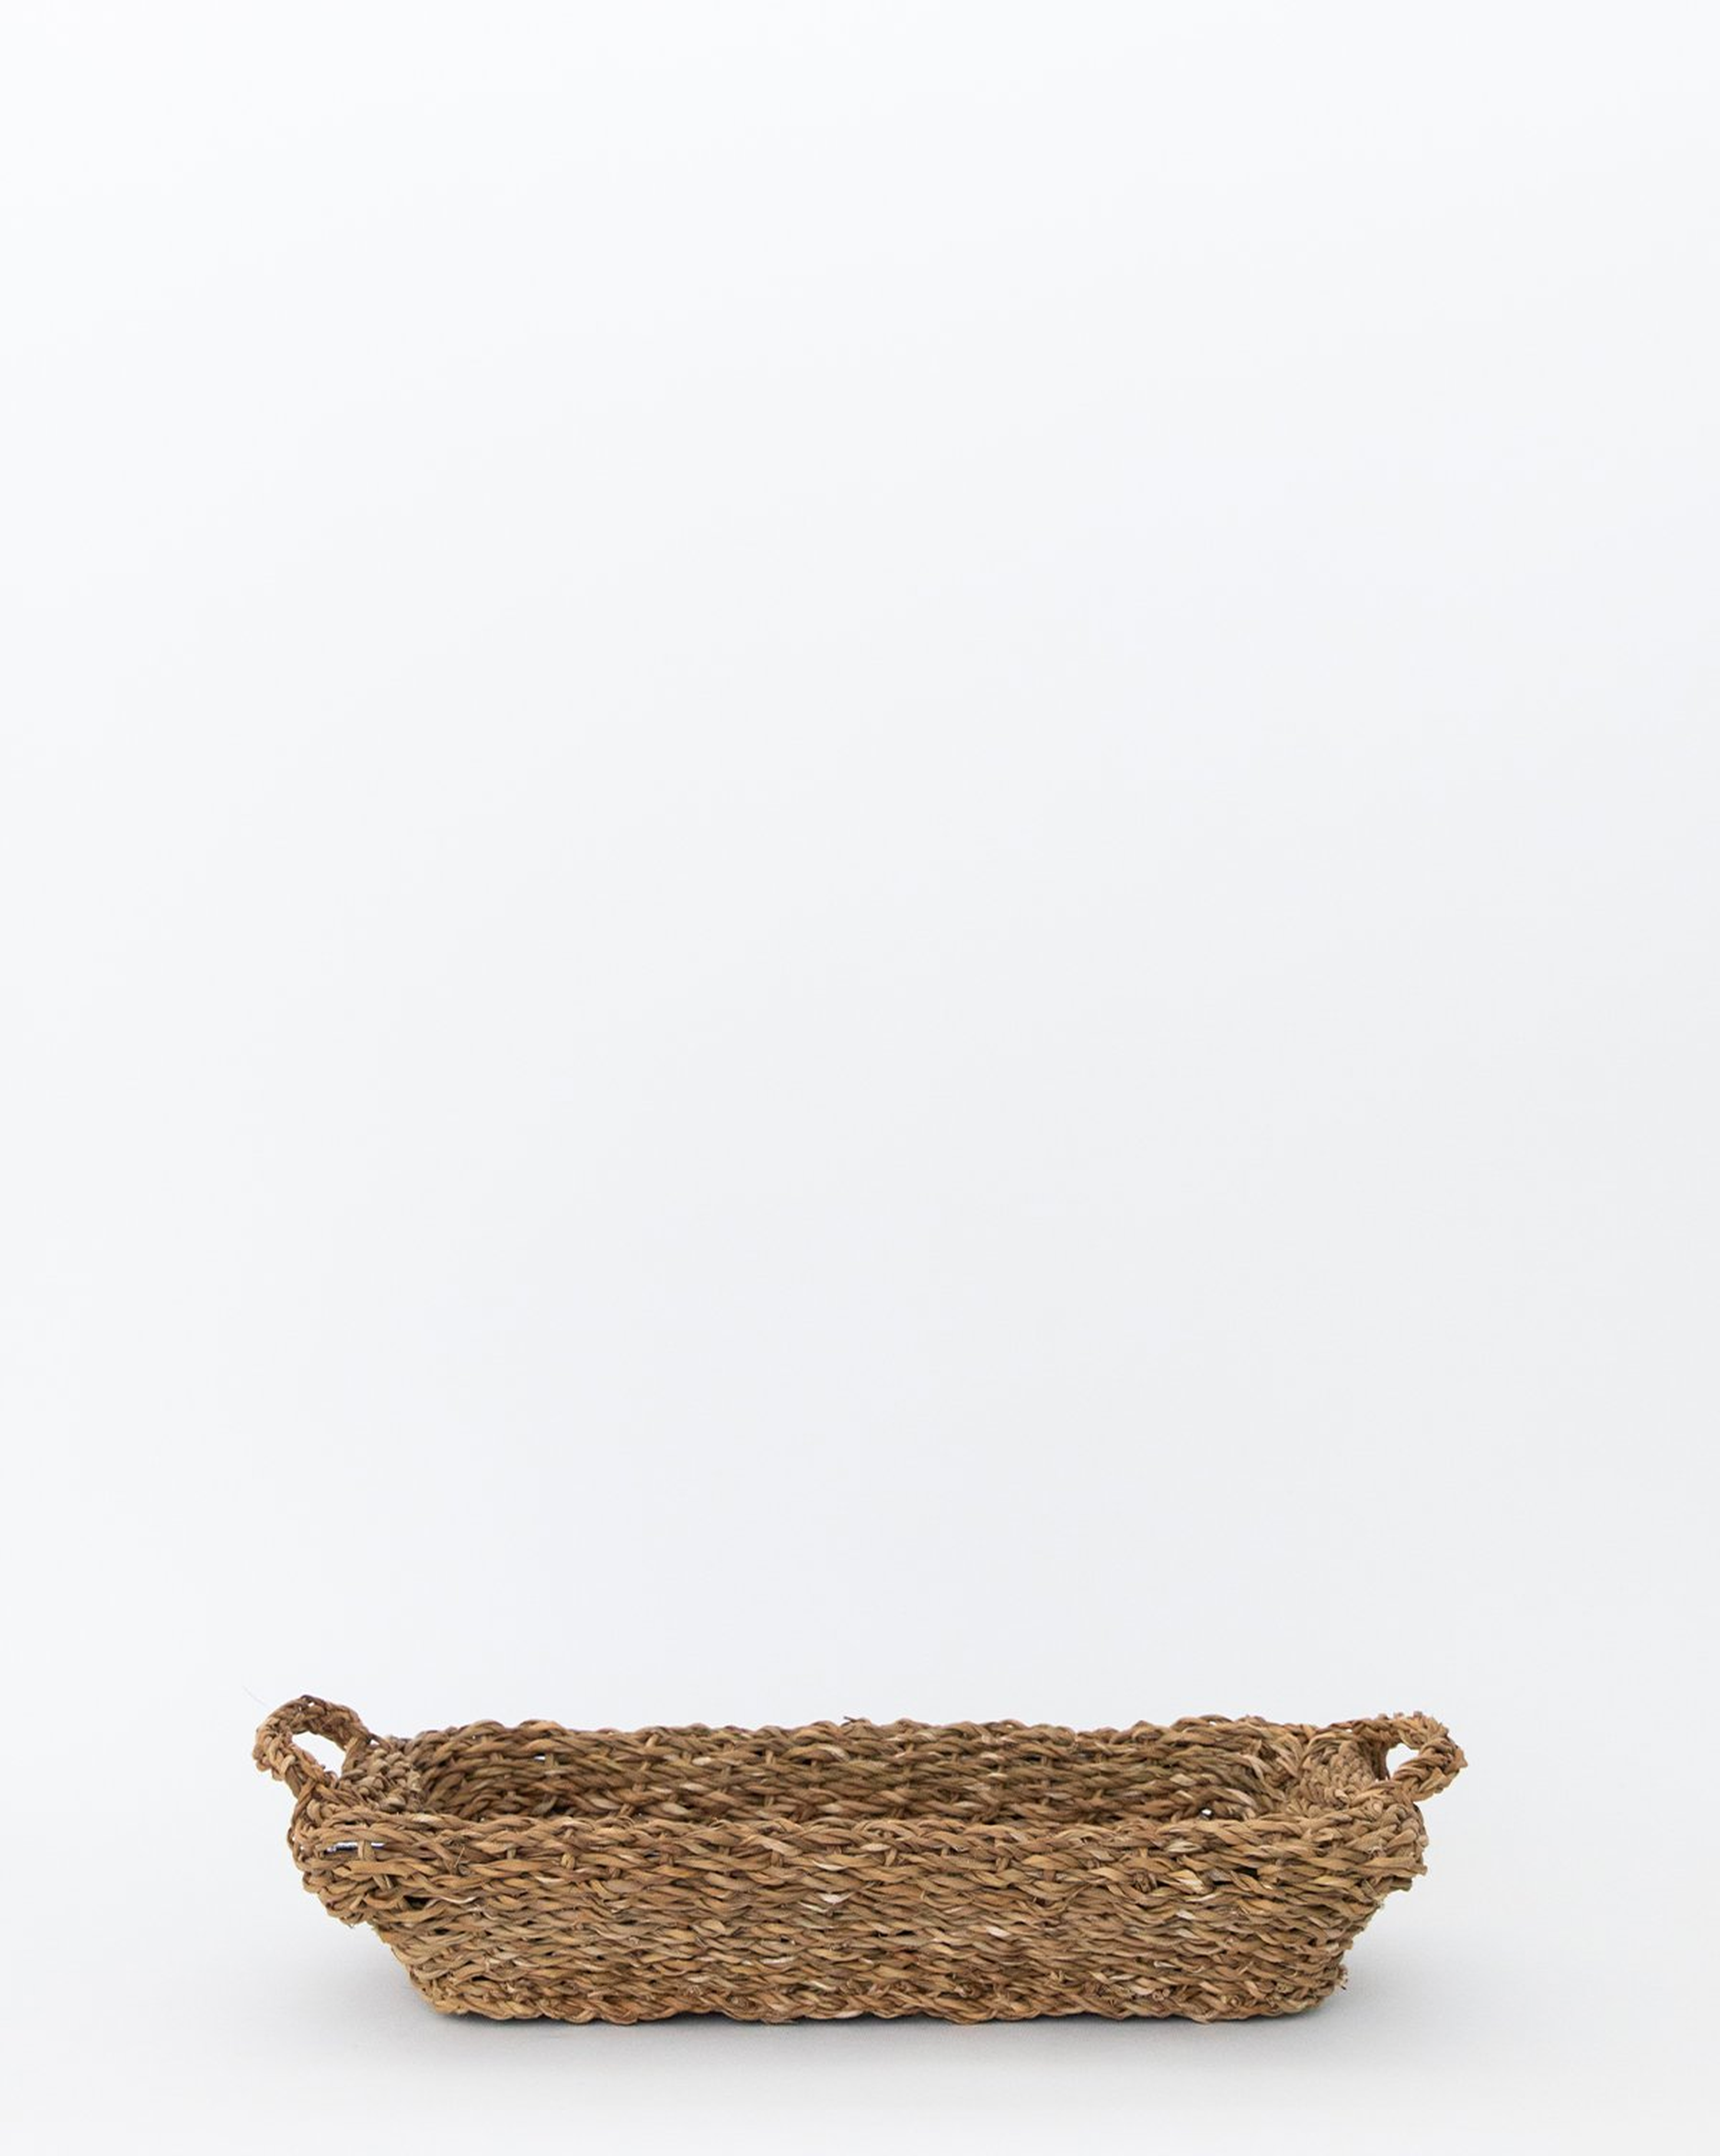 SEAGRASS CATCH-ALL BASKET - McGee & Co.